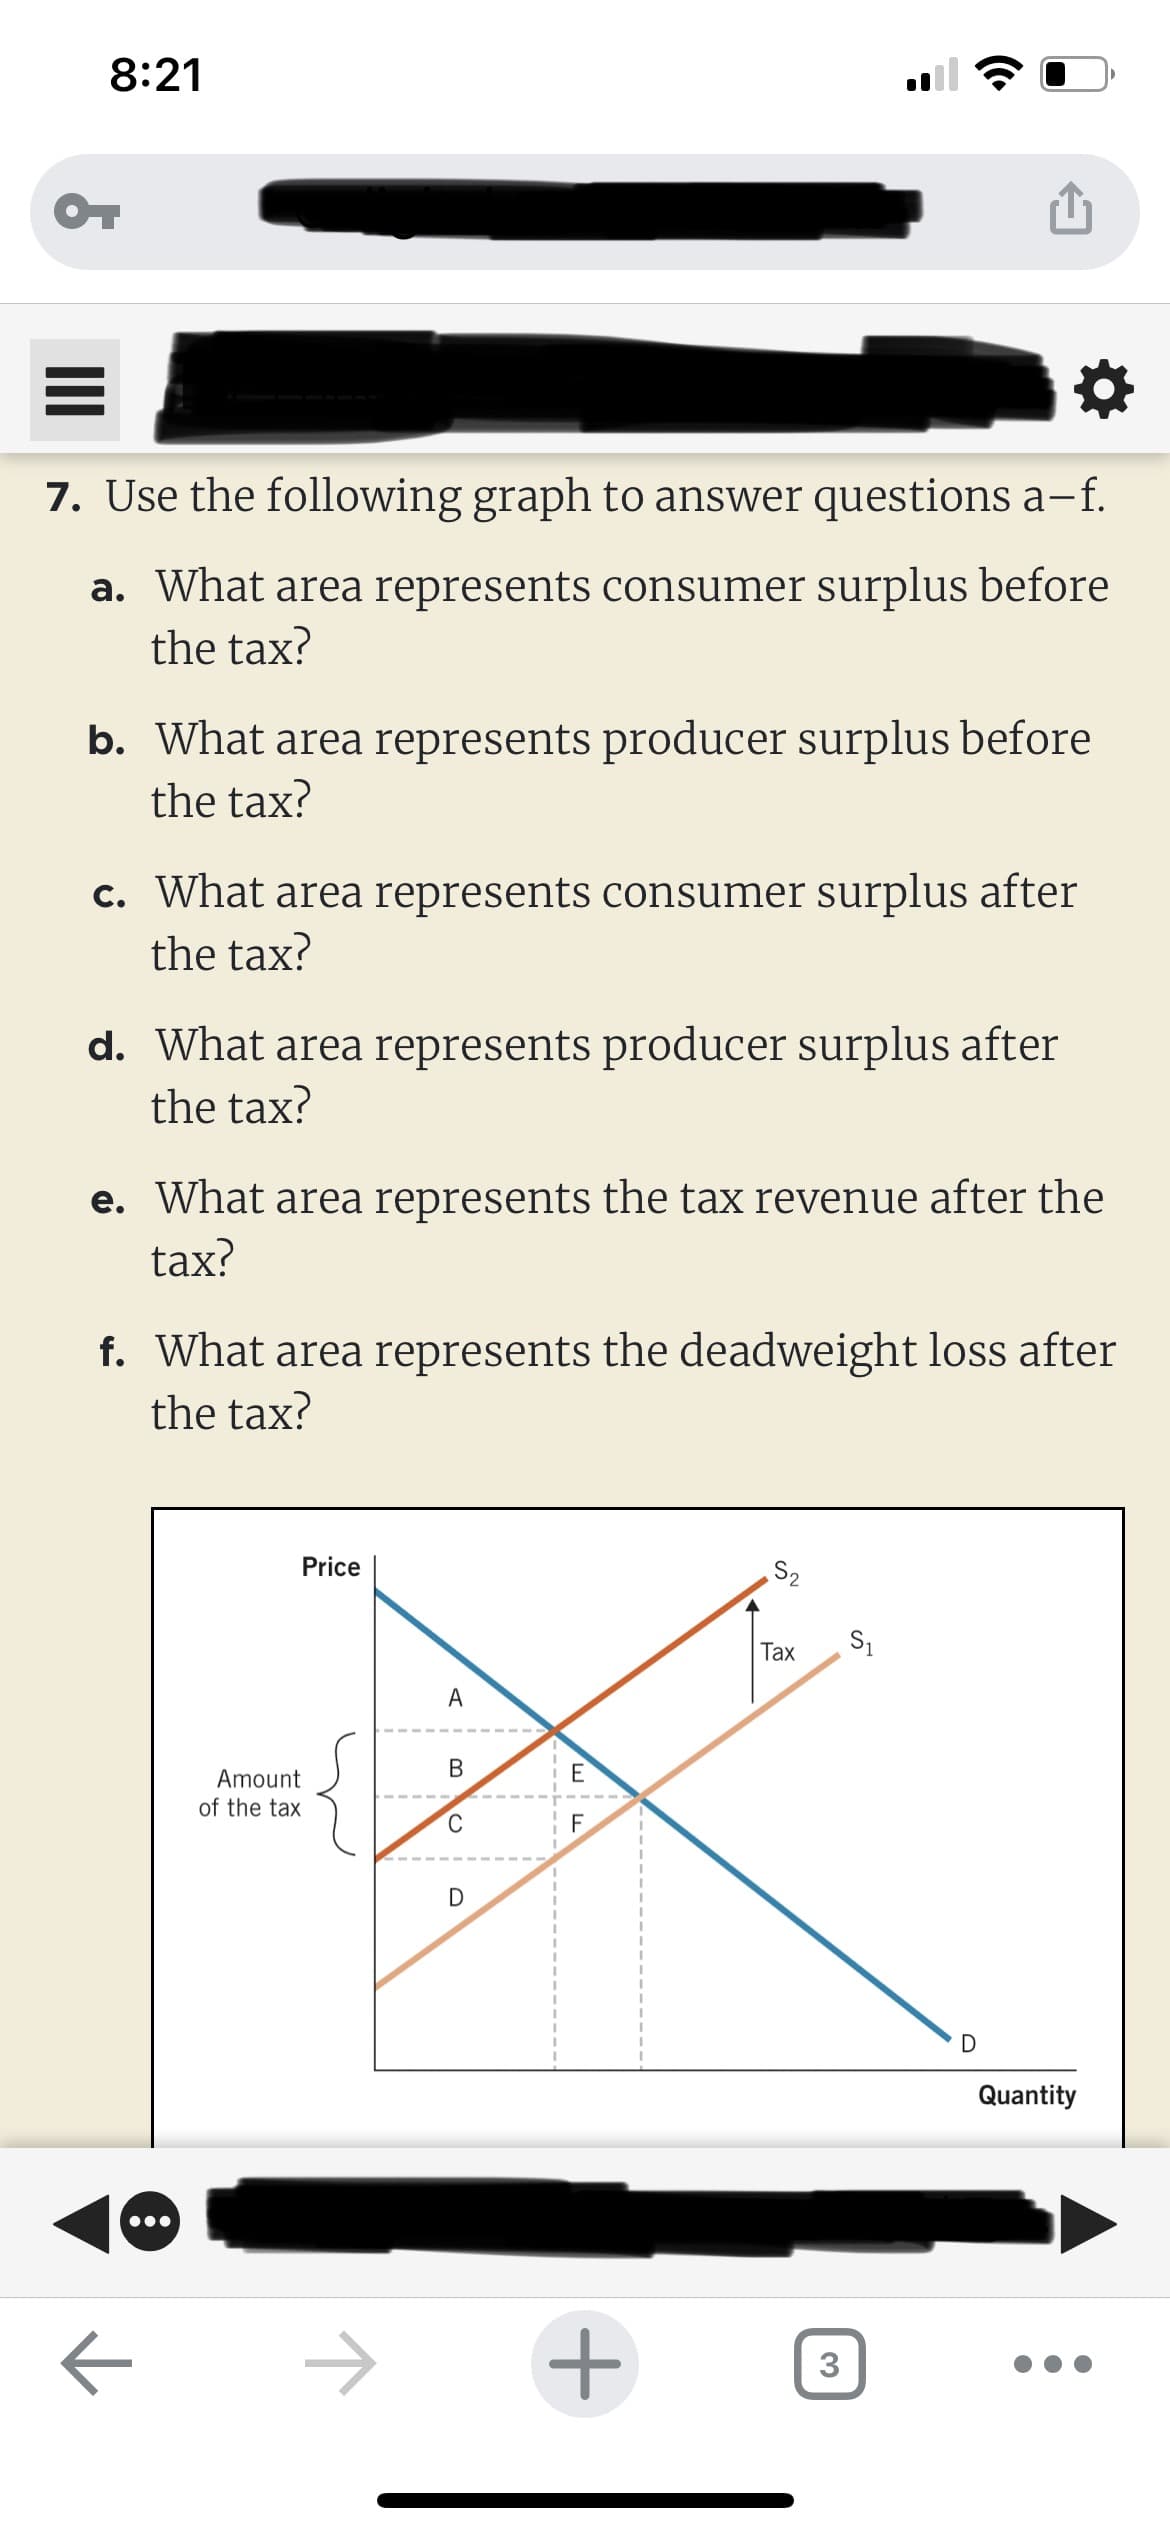 8:21
OT
7. Use the following graph to answer questions a-−f.
a. What area represents consumer surplus before
the tax?
b. What area represents producer surplus before
the tax?
c. What area represents consumer surplus after
the tax?
d. What area represents producer surplus after
the tax?
e. What area represents the tax revenue after the
tax?
f. What area represents the deadweight loss after
the tax?
8
←
Amount
of the tax
Price
1
A
B
C
D
E
F
+
S₂
2
Tax
3
S₁
D
Quantity